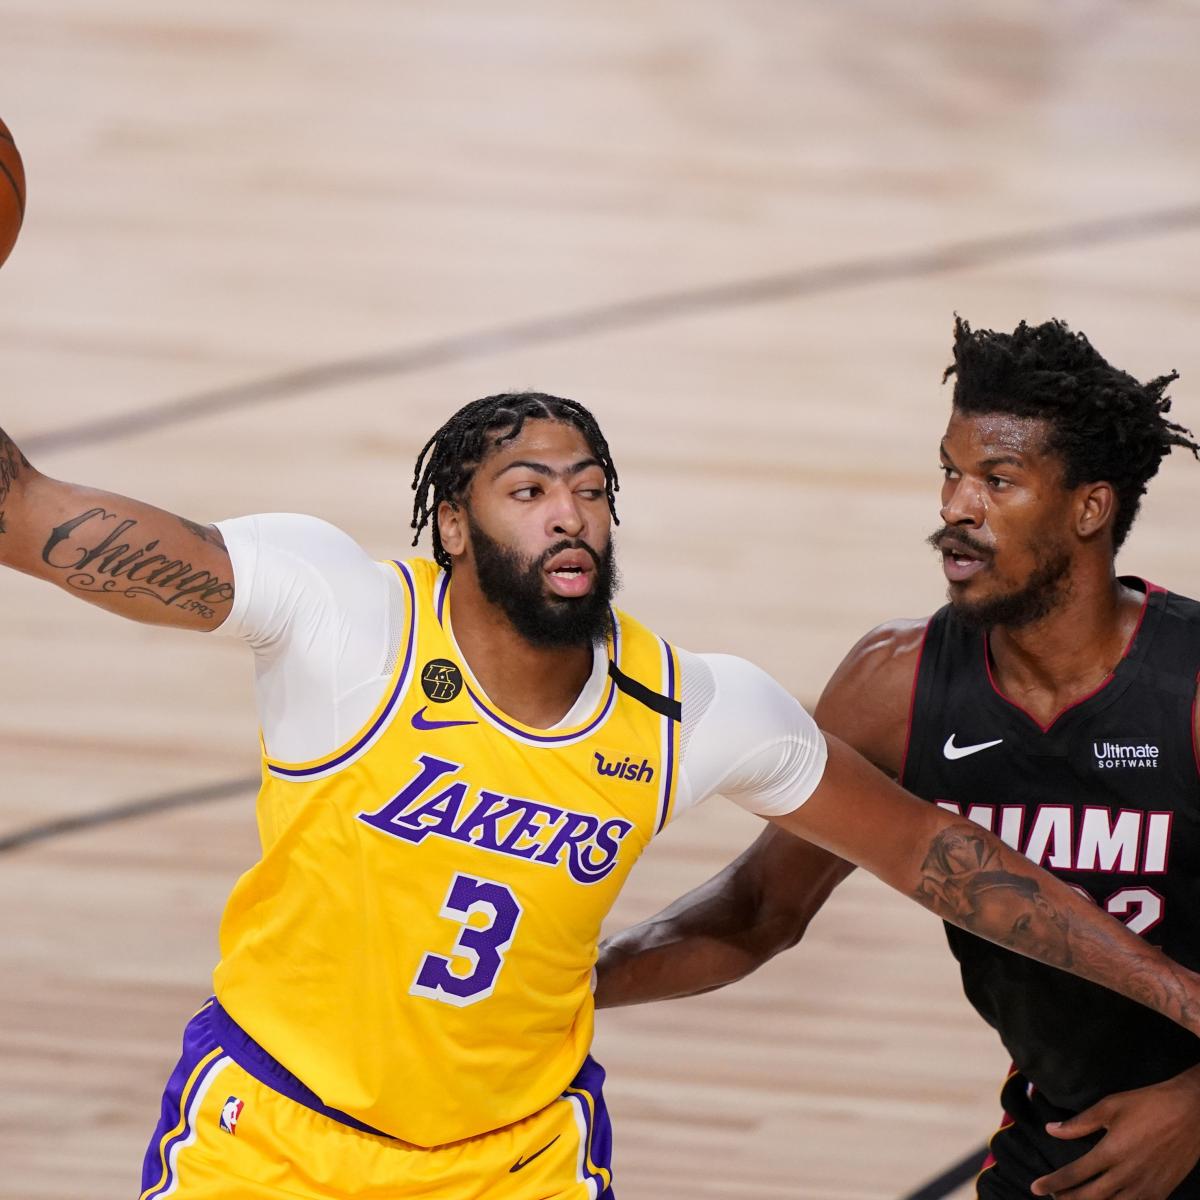 NBA Free Agents 2020 Rumors, Predictions for Anthony Davis, Lakers and